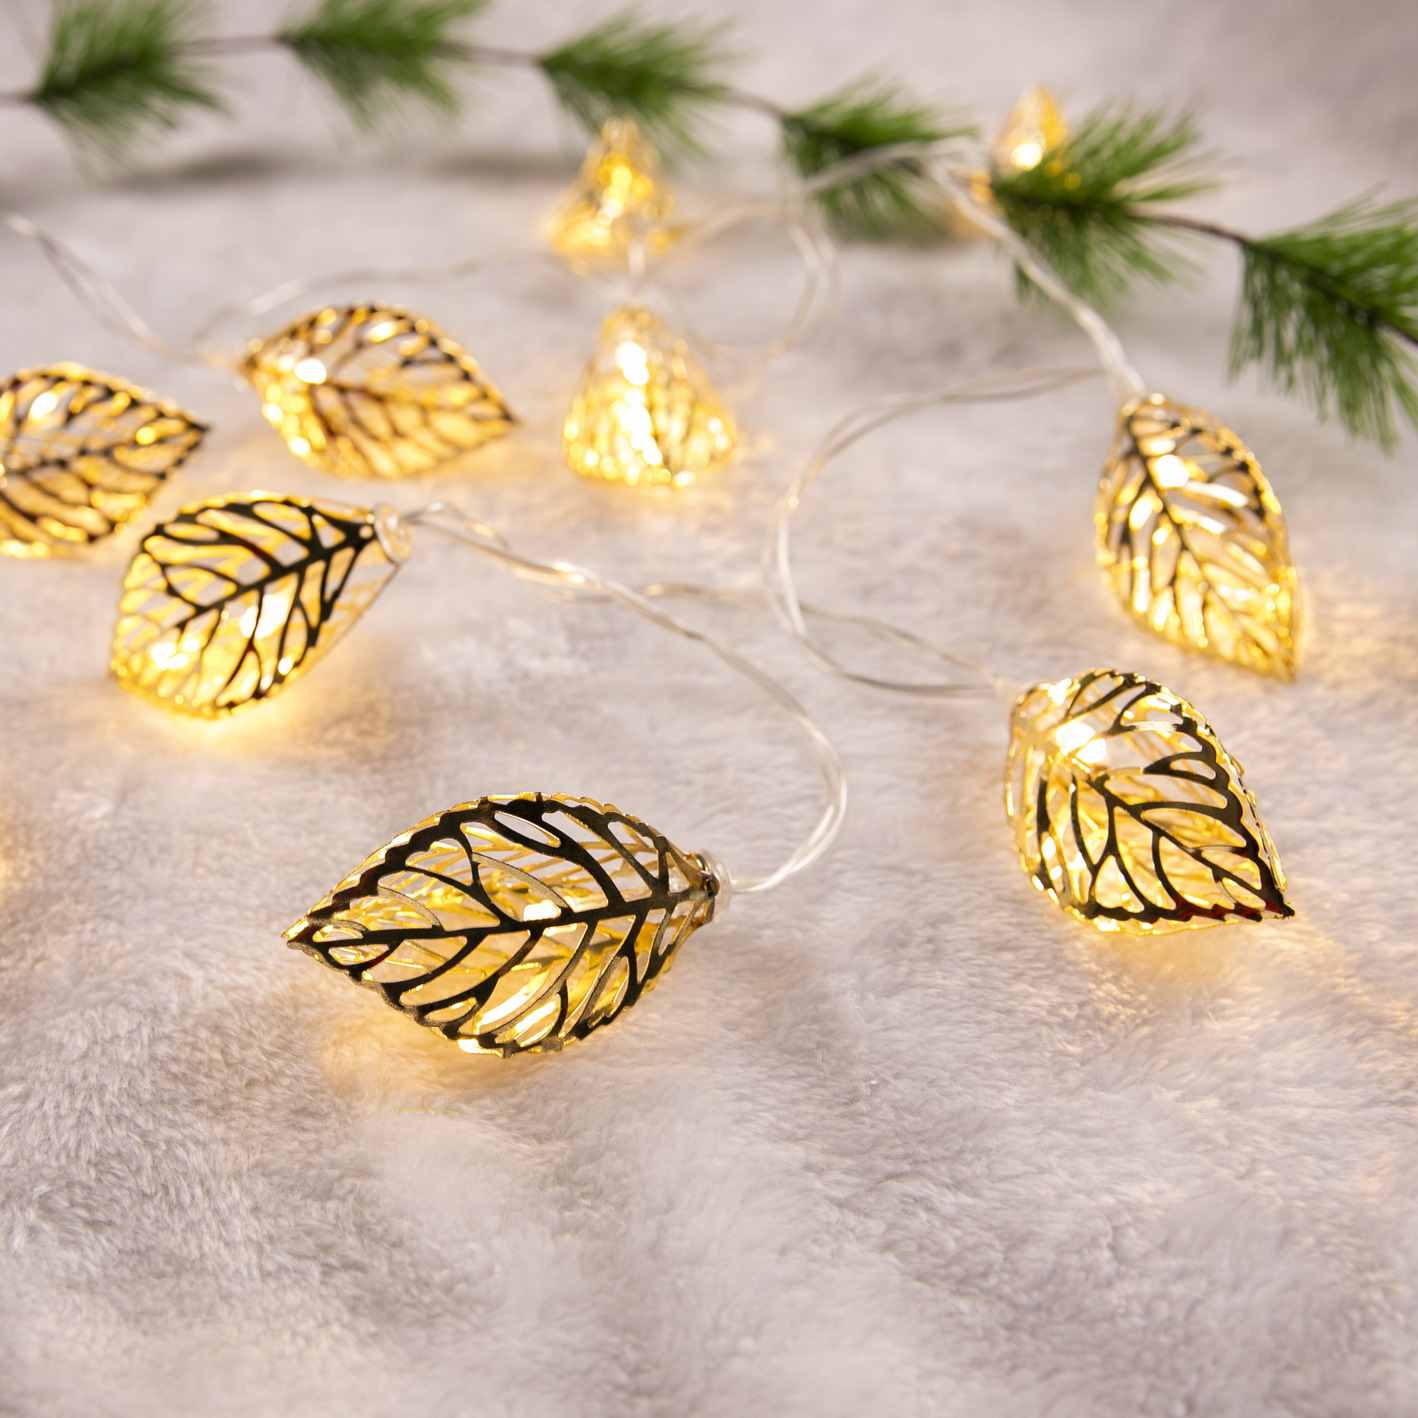 Low price for Bedroom Fairy Lights -
 China Customized Metal Golden Leaf Christmas Fairy String Light For Holiday Decoration | ZHONGXIN – Zhongxin